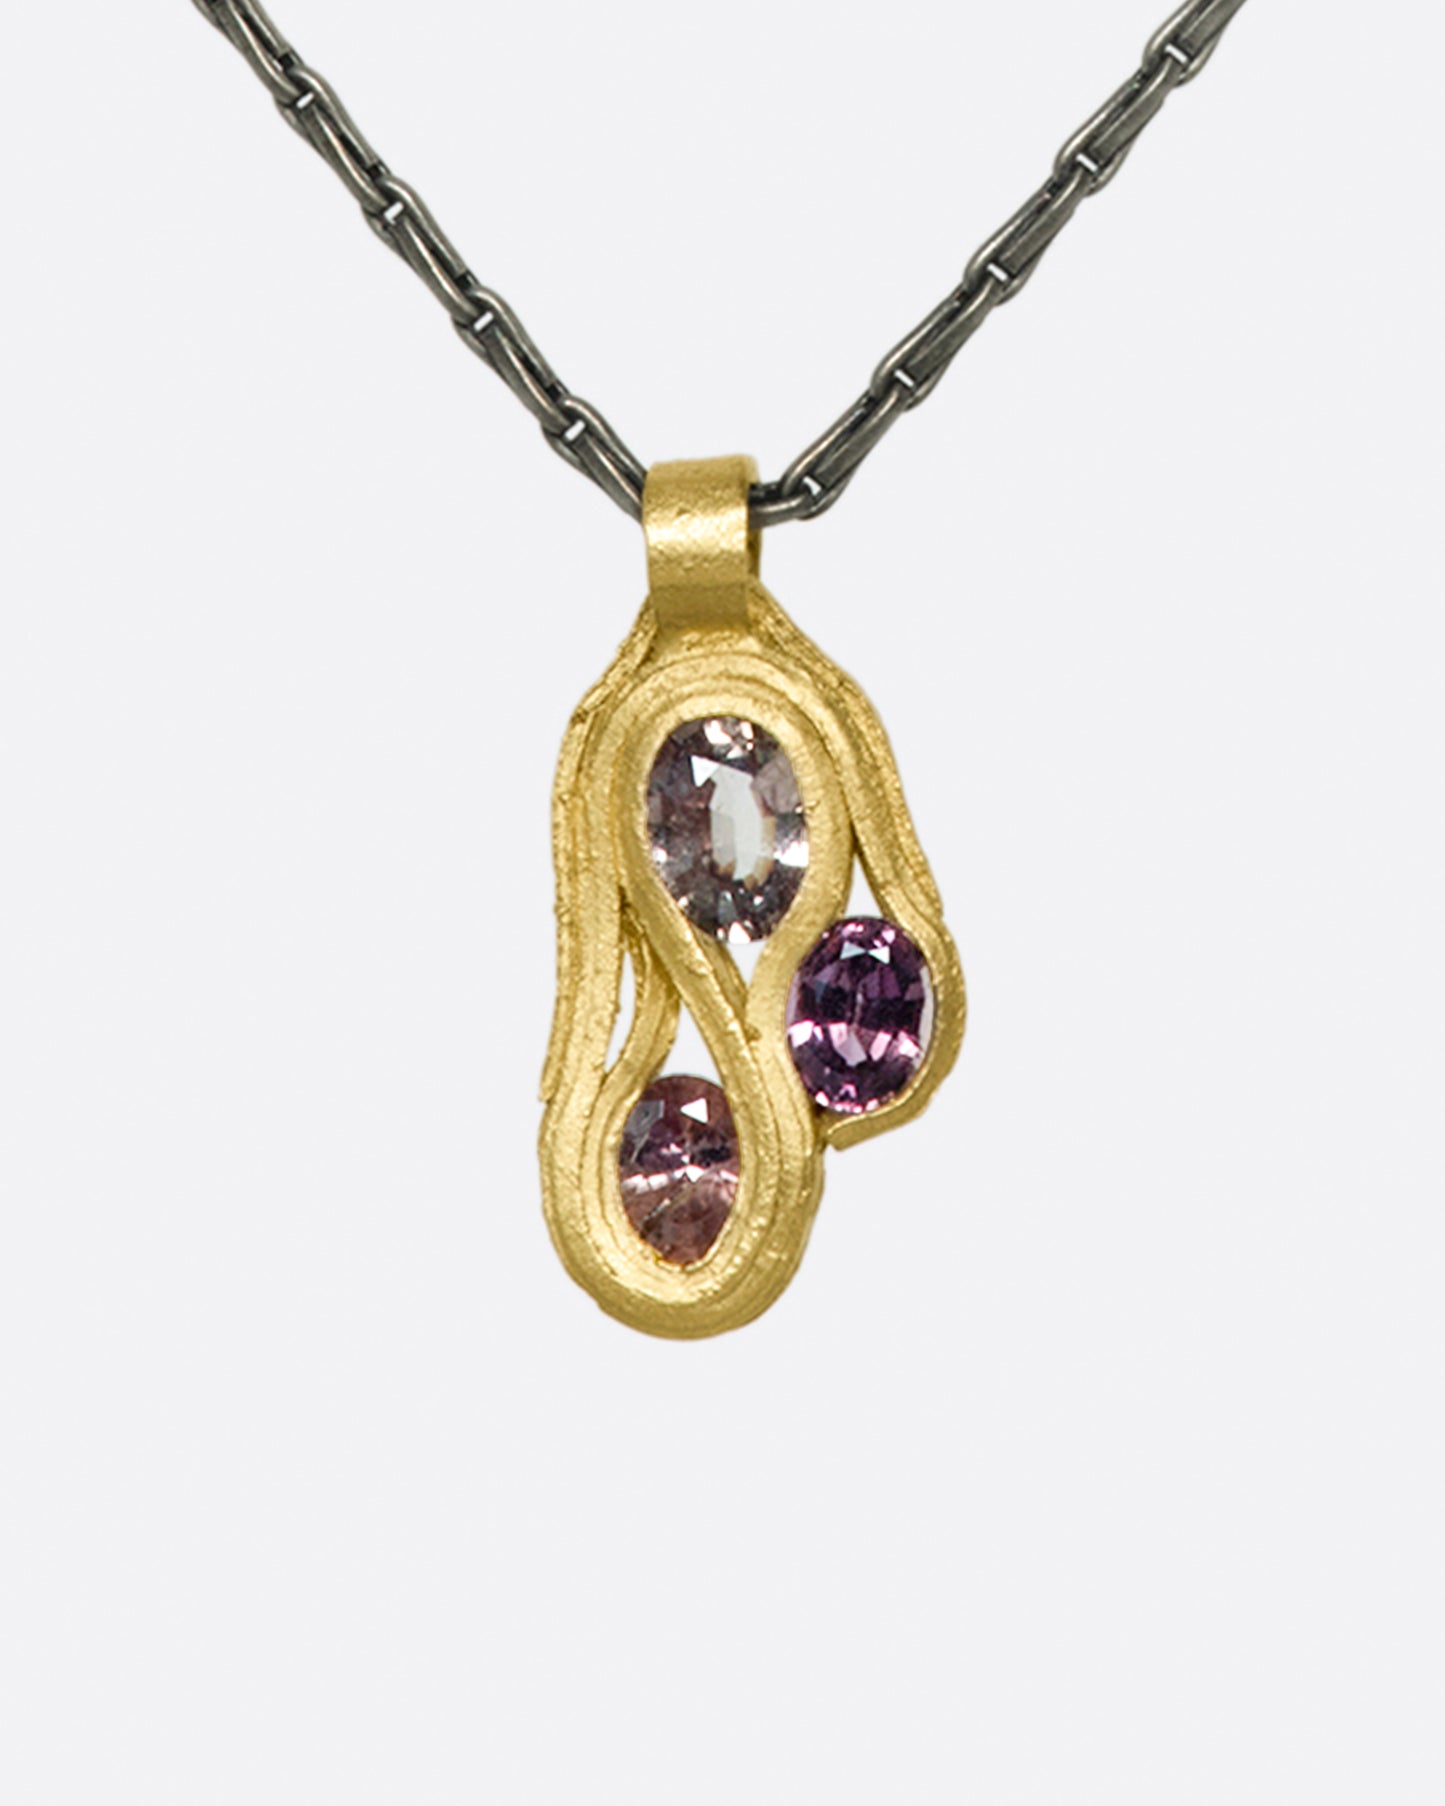 An organically shaped pendant featuring three oval pink sapphires enwrapped with 14k gold